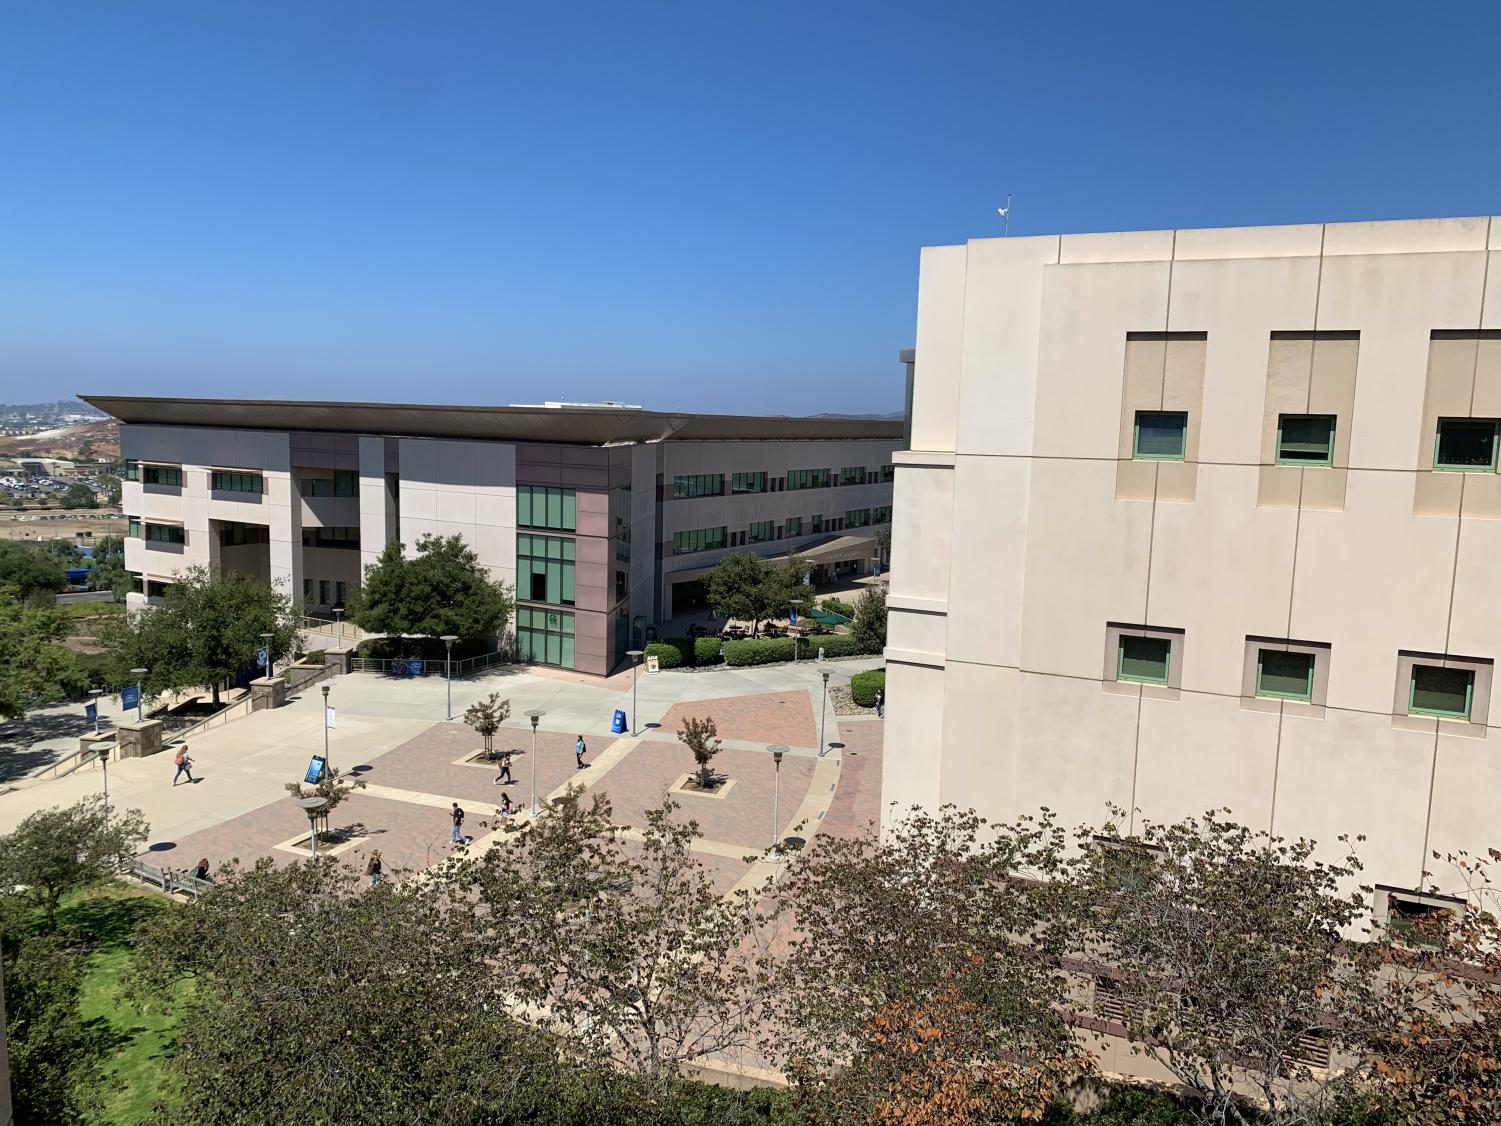 Csusm Academic Calendar 2022 Spring 2022 Course Schedule Now Available - The Cougar Chronicle